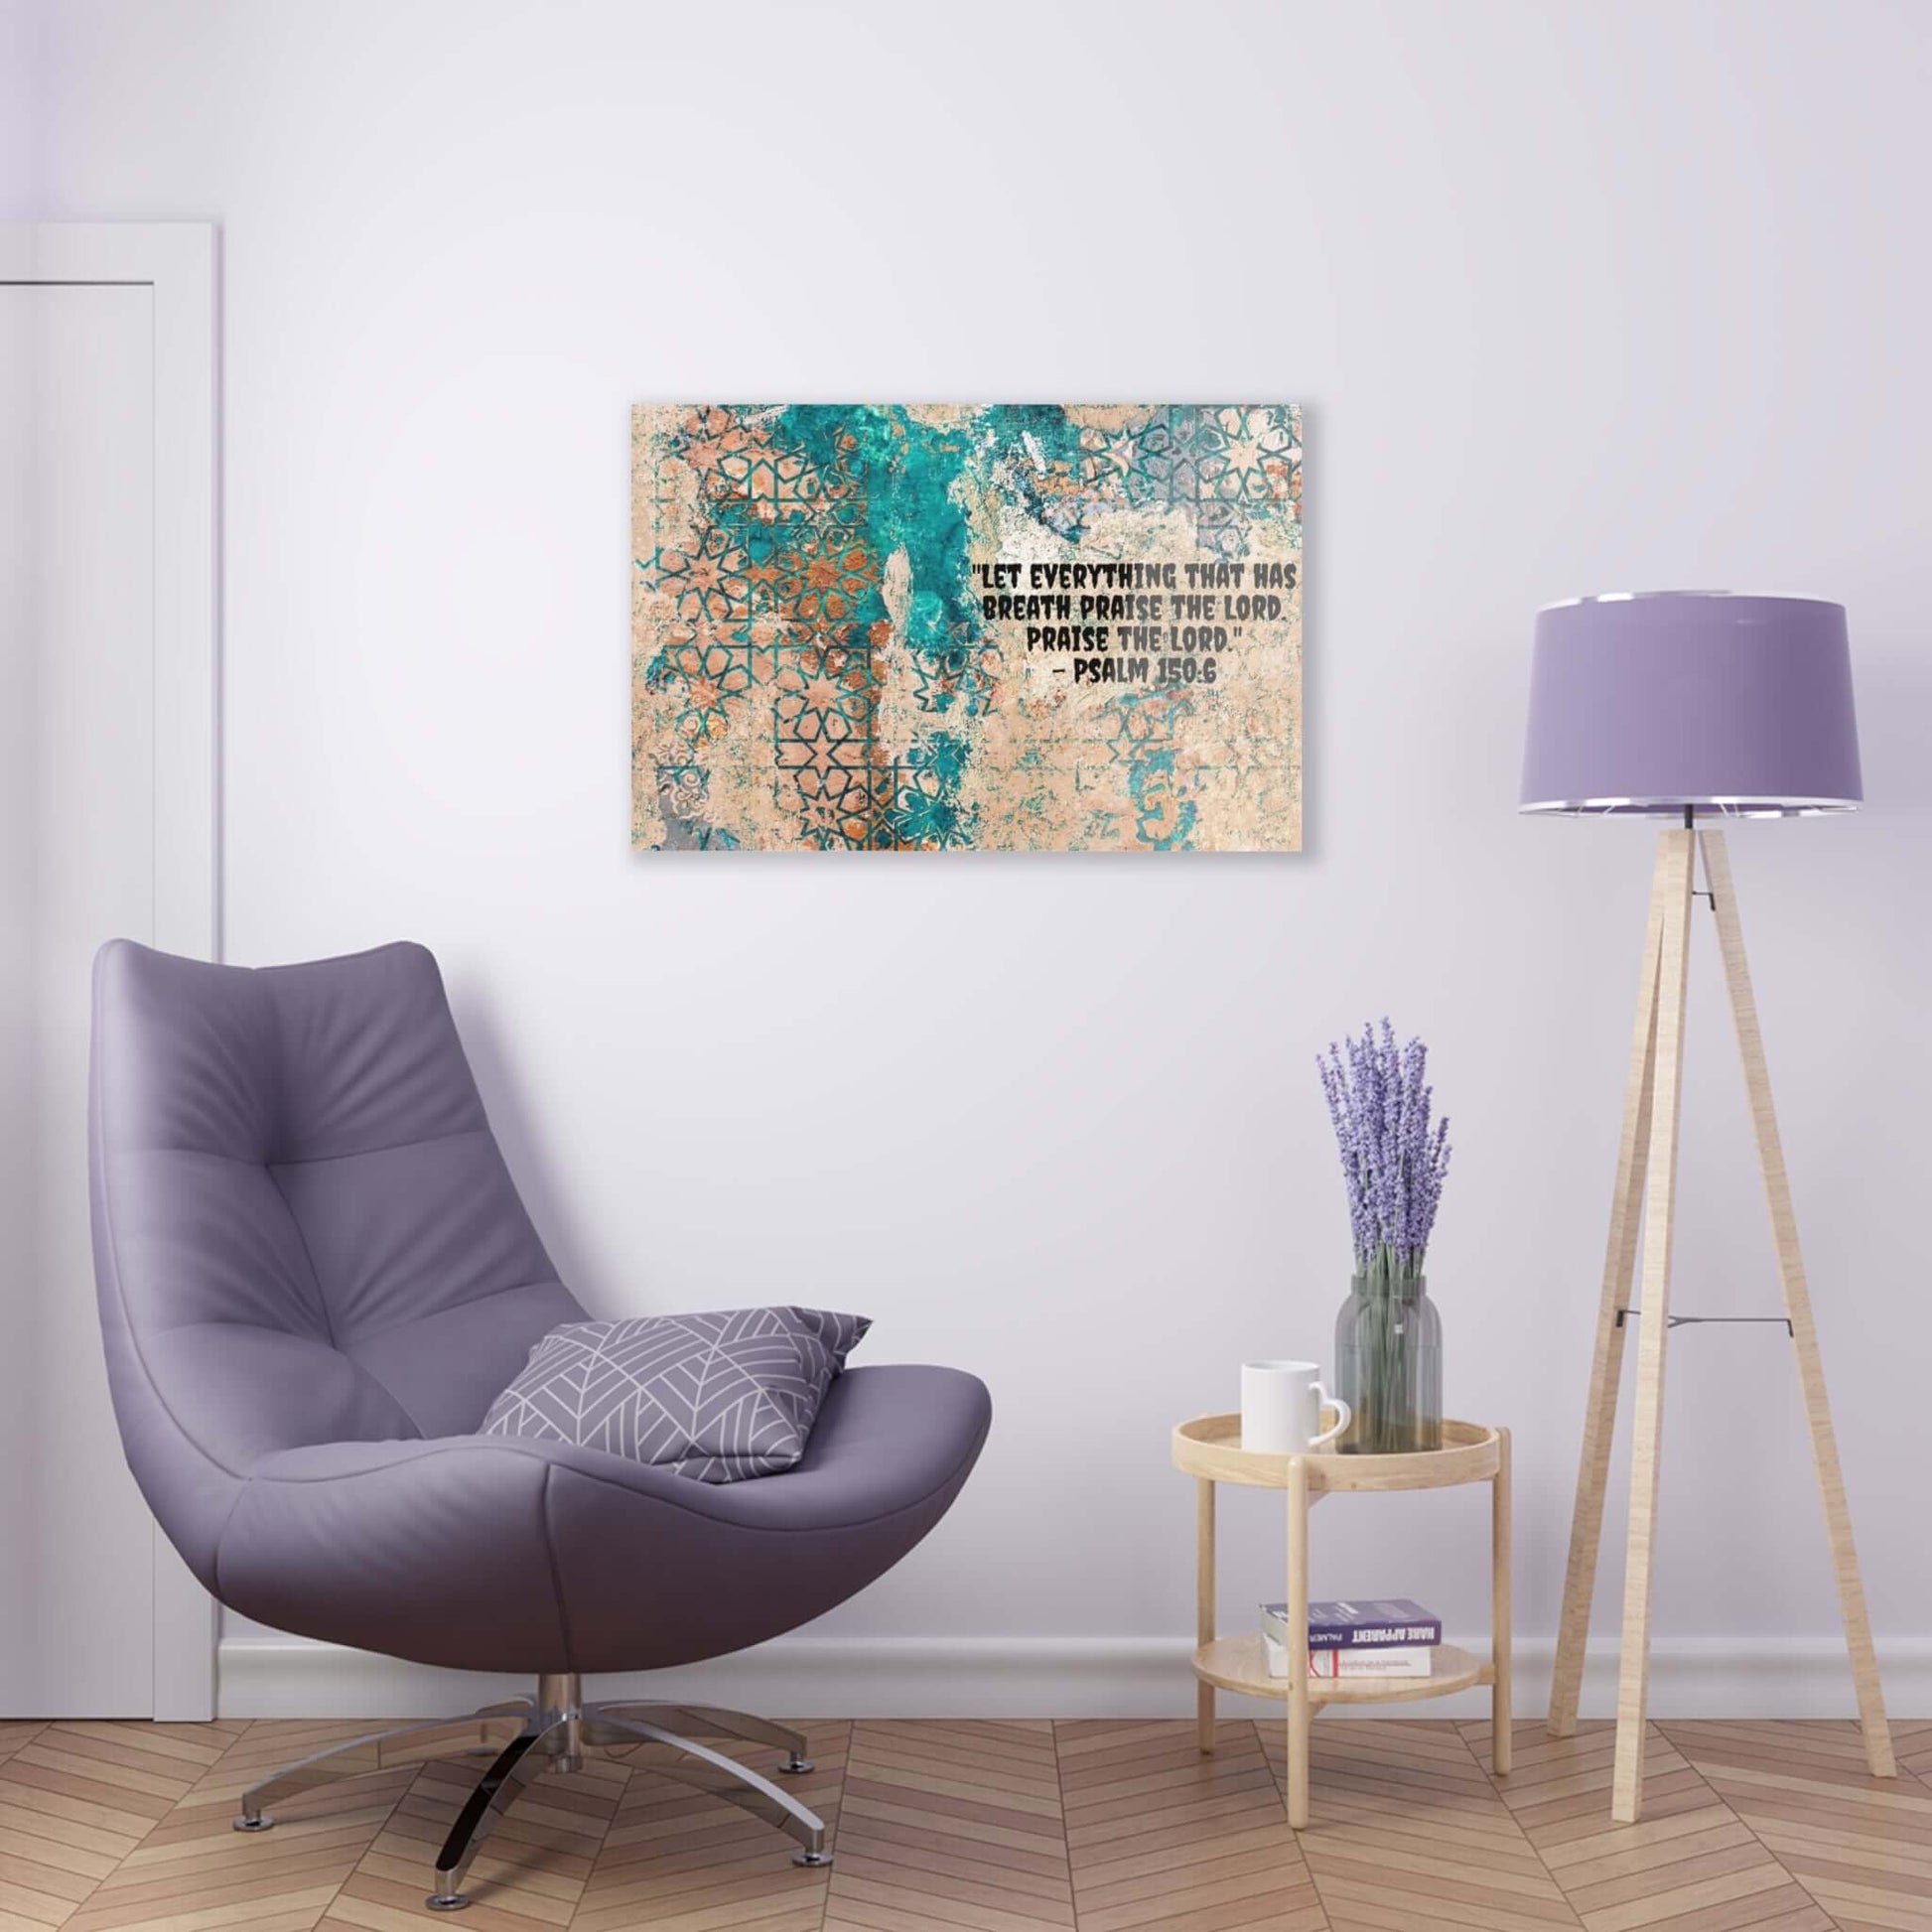 Rustic Wall Art - Acrylic Print with Psalm 150:6 | Art & Wall Decor,Assembled in the USA,Assembled in USA,Decor,Home & Living,Home Decor,Indoor,Made in the USA,Made in USA,Poster